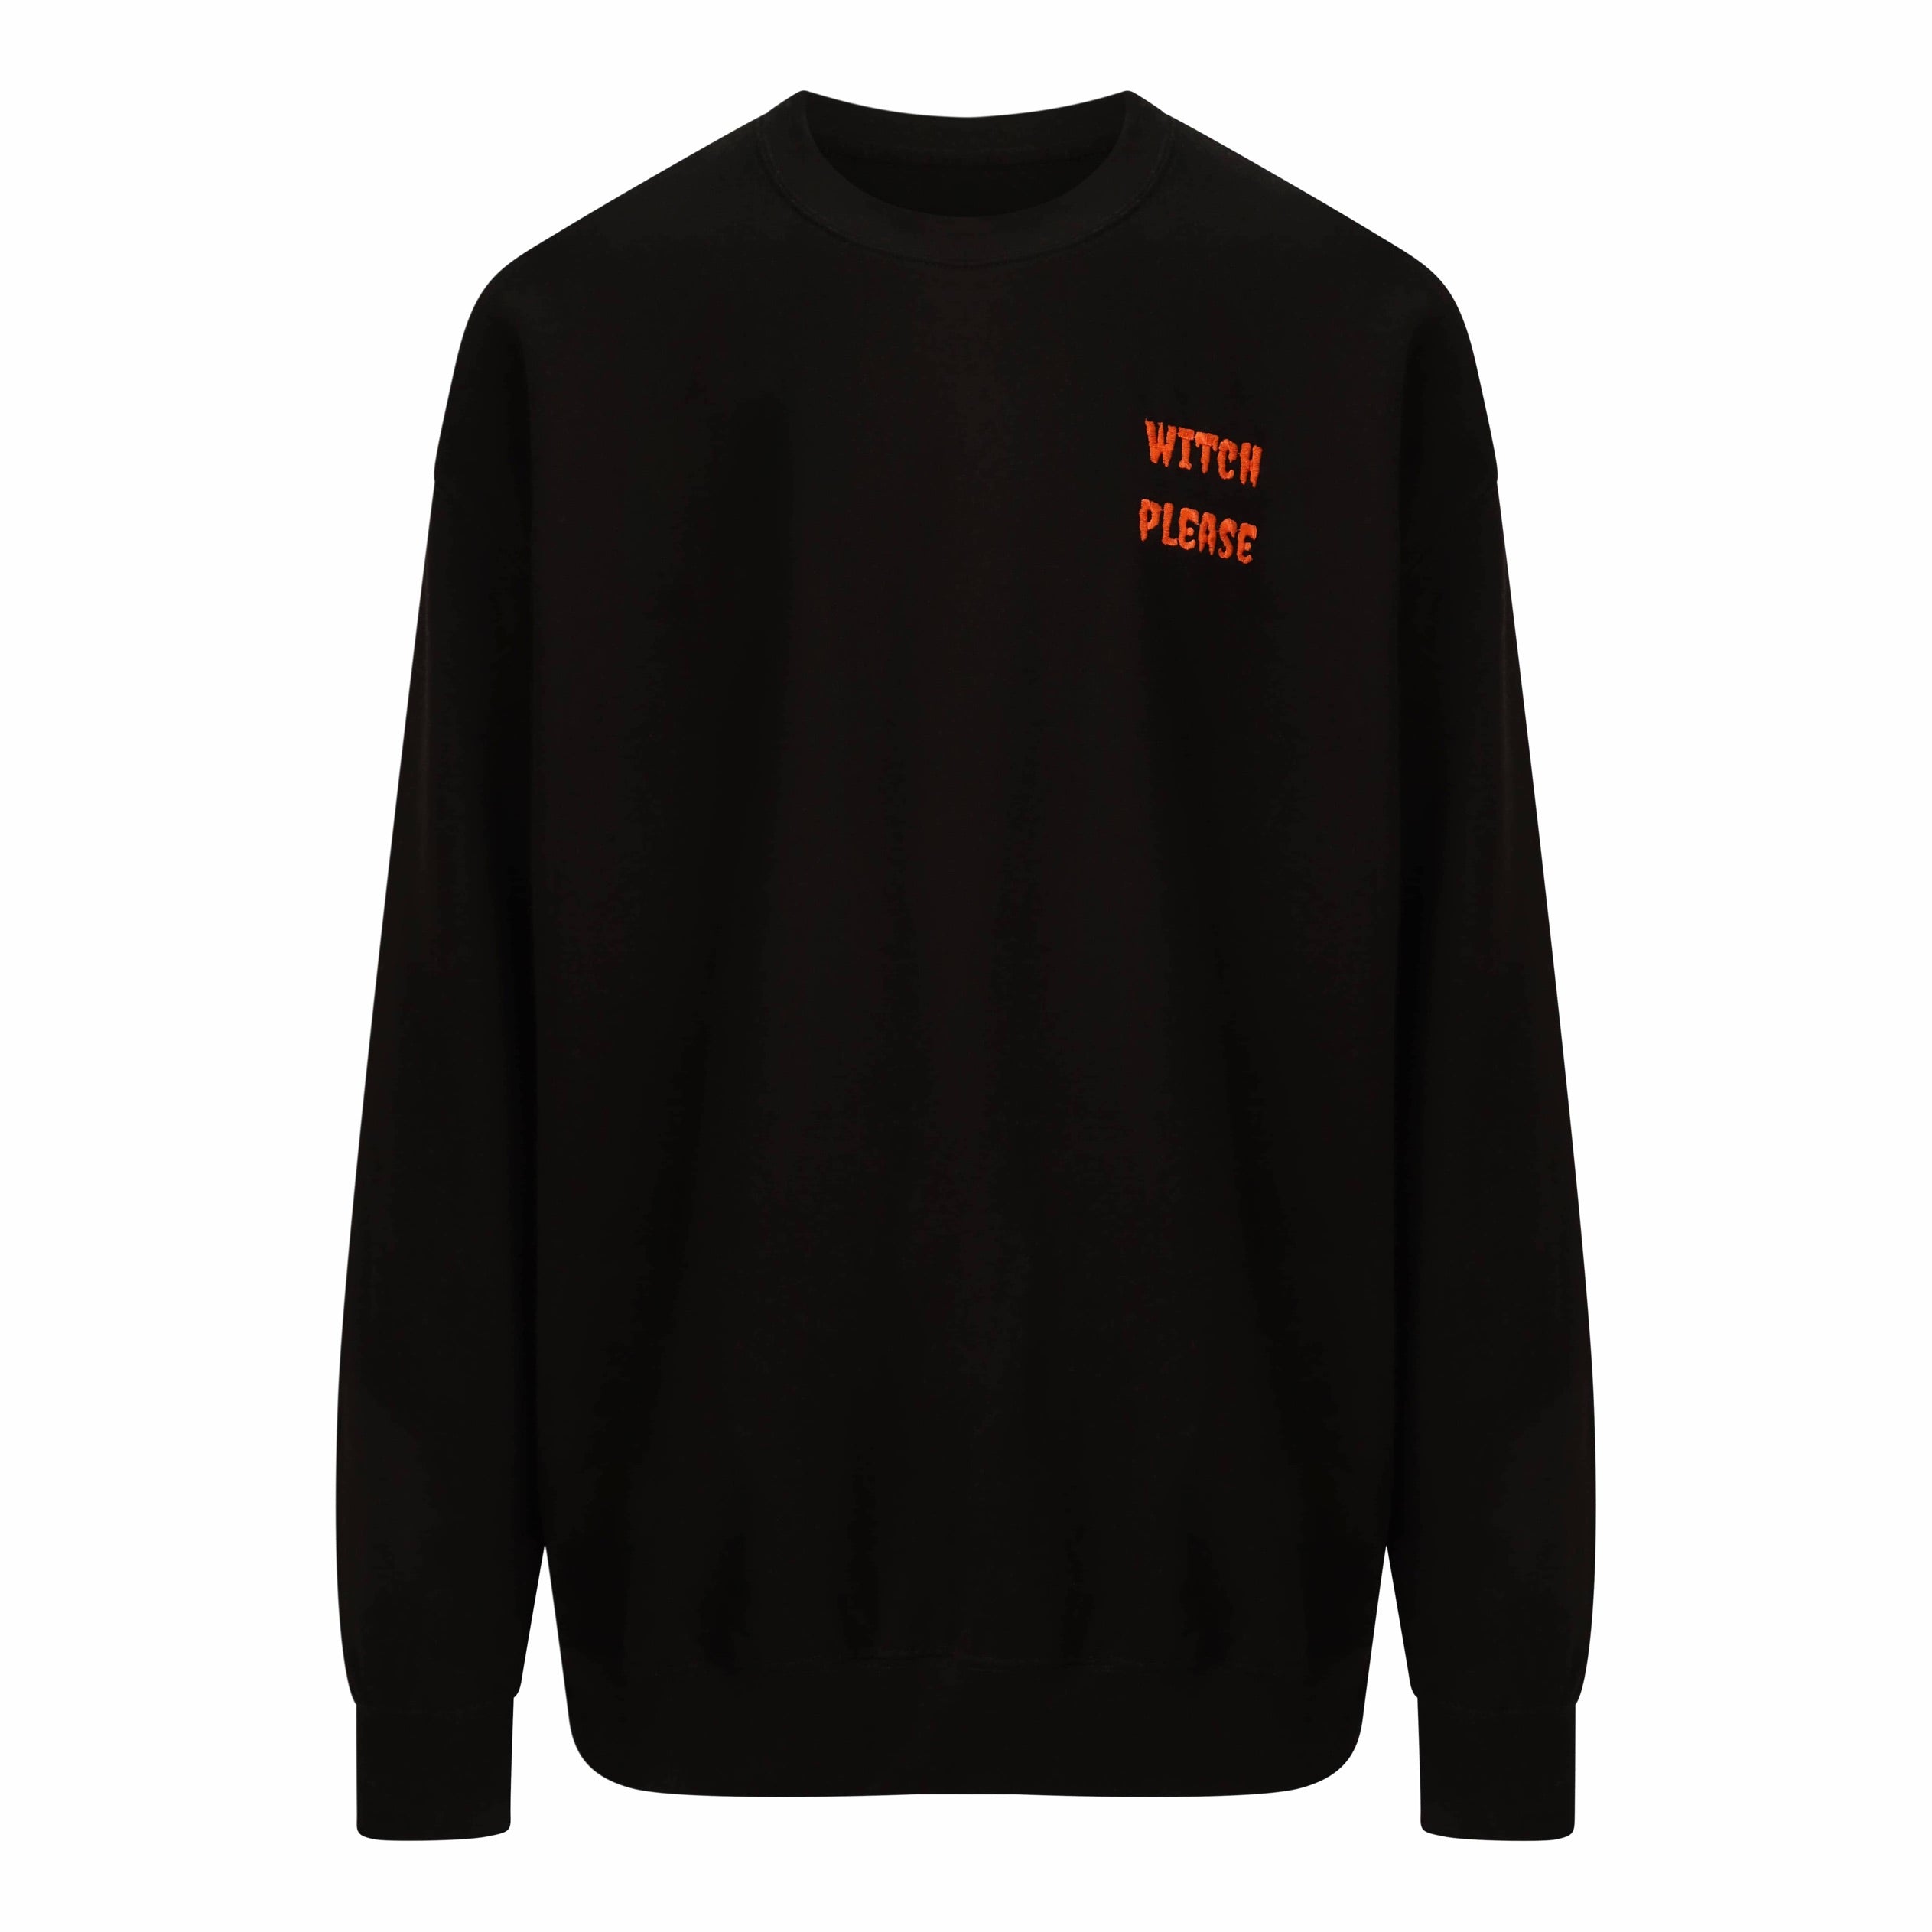 Jet black jumper with pumpkin orange embroidery that reads witch please on the left hand side of the chest. Witch please is written in a halloween creepy style text and is in all caps